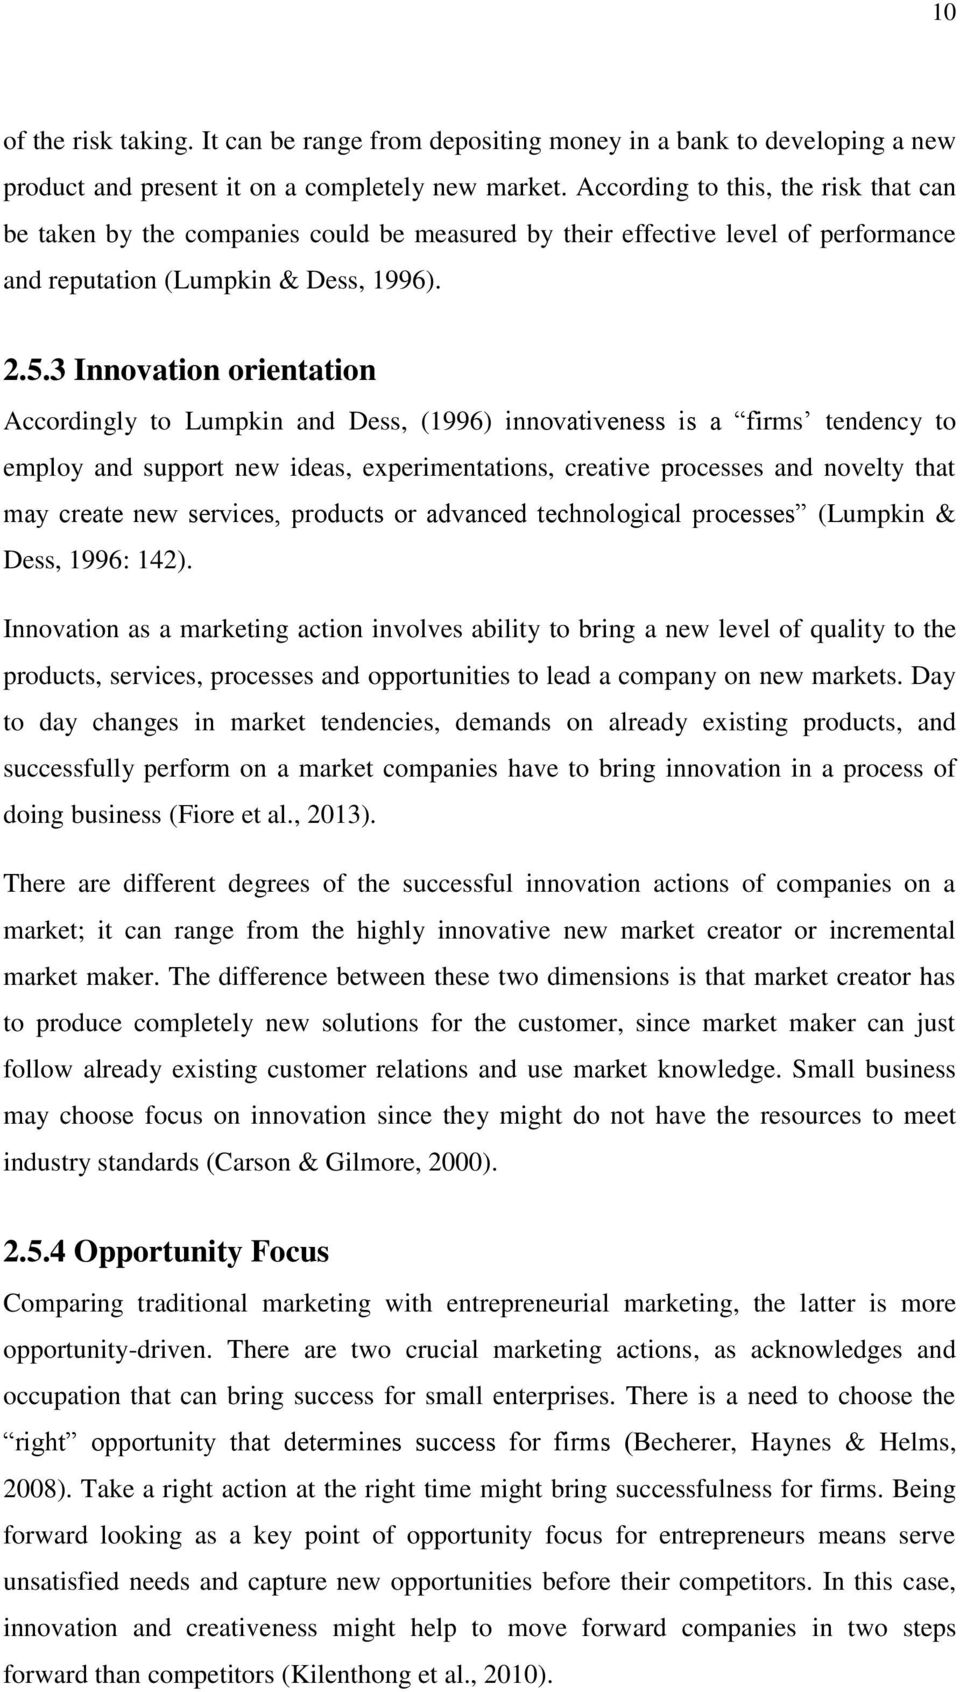 3 Innovation orientation Accordingly to Lumpkin and Dess, (1996) innovativeness is a firms tendency to employ and support new ideas, experimentations, creative processes and novelty that may create